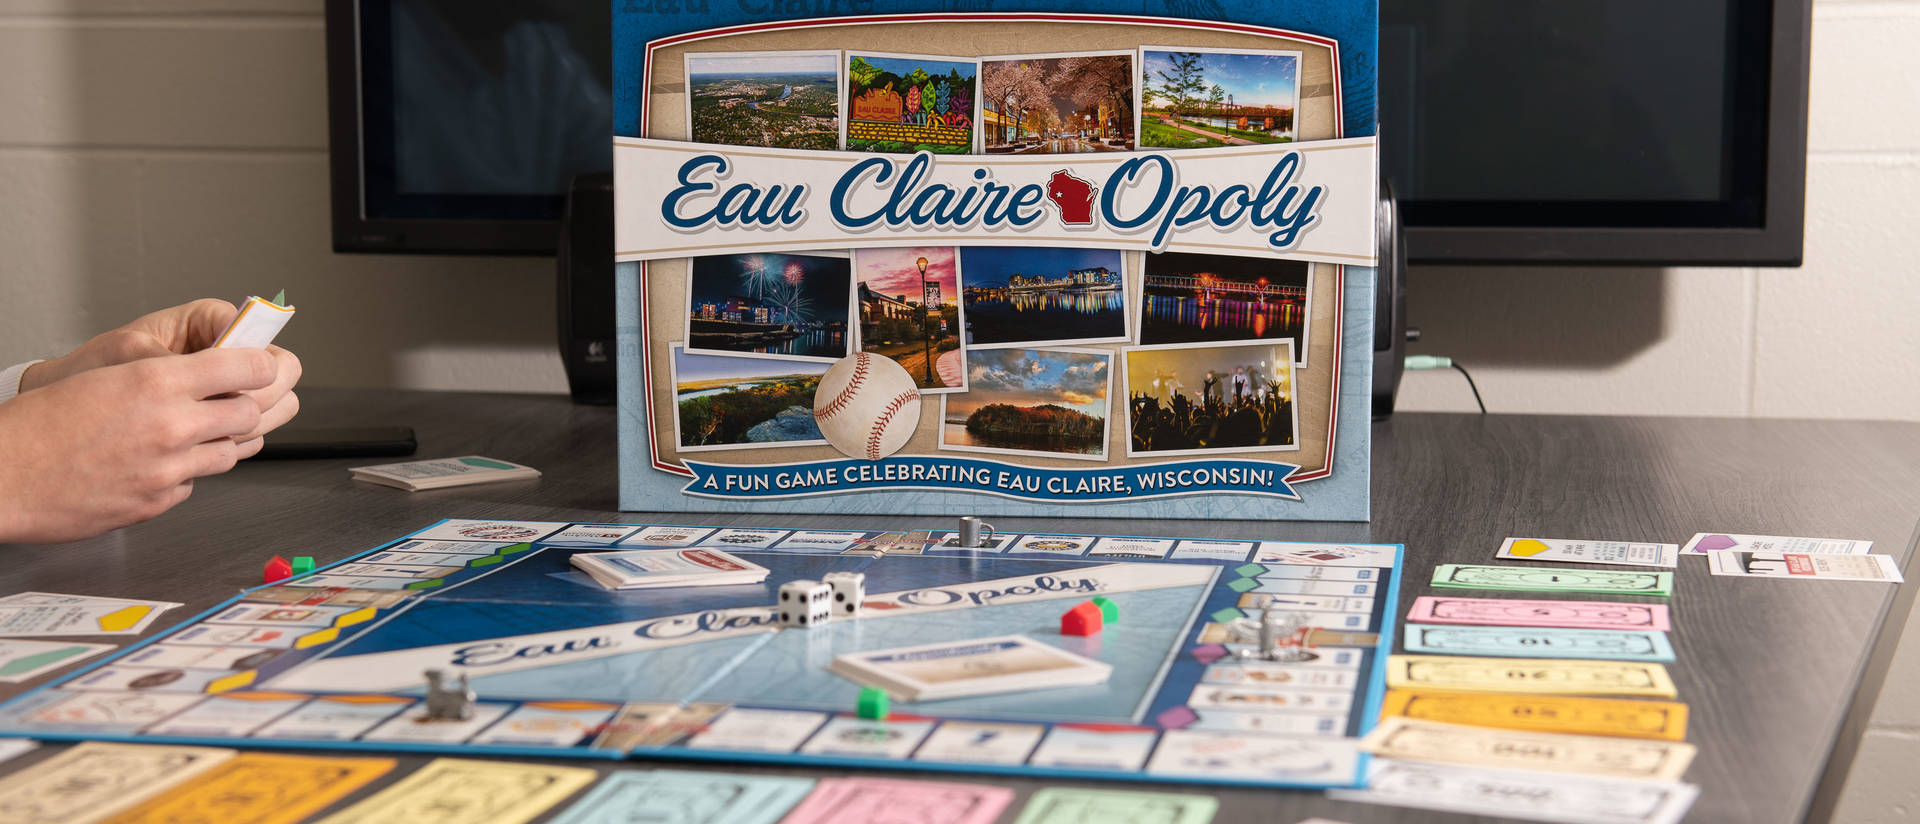 Eau Claire-Opoly features Eau Claire businesses, parks and other places familiar to students and others who live in the area.